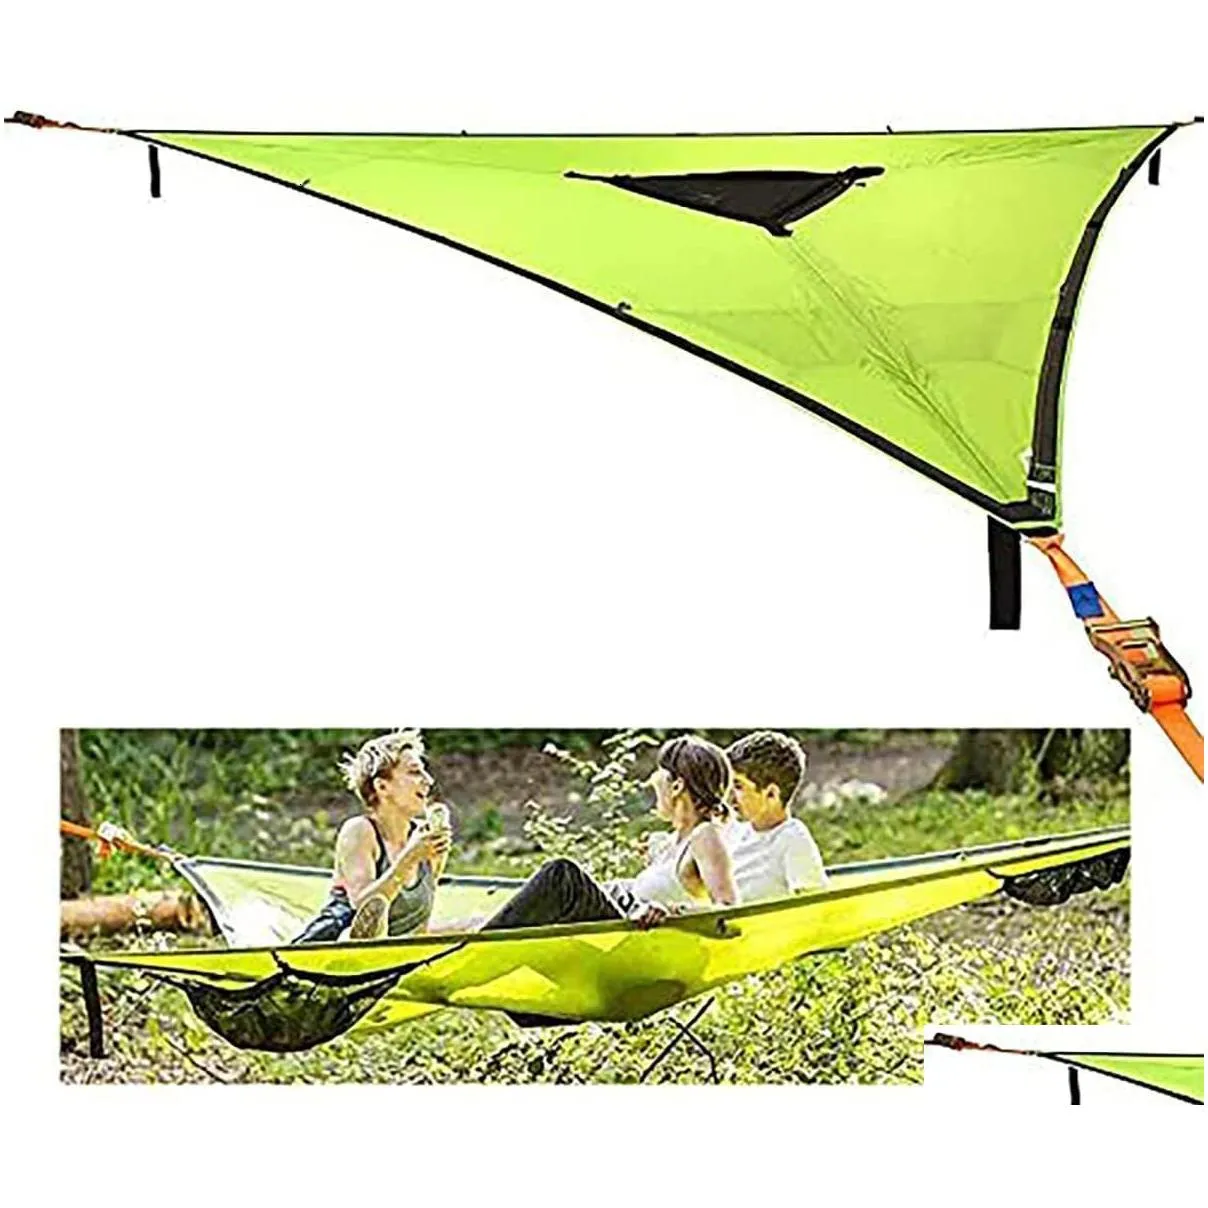 Portaledges Portable Triangle Hammock 4Mx4Mx4M Multi Person Aerial Mat Convenient Outdoor Camping Sleep Hammock Portable Hanging Bed